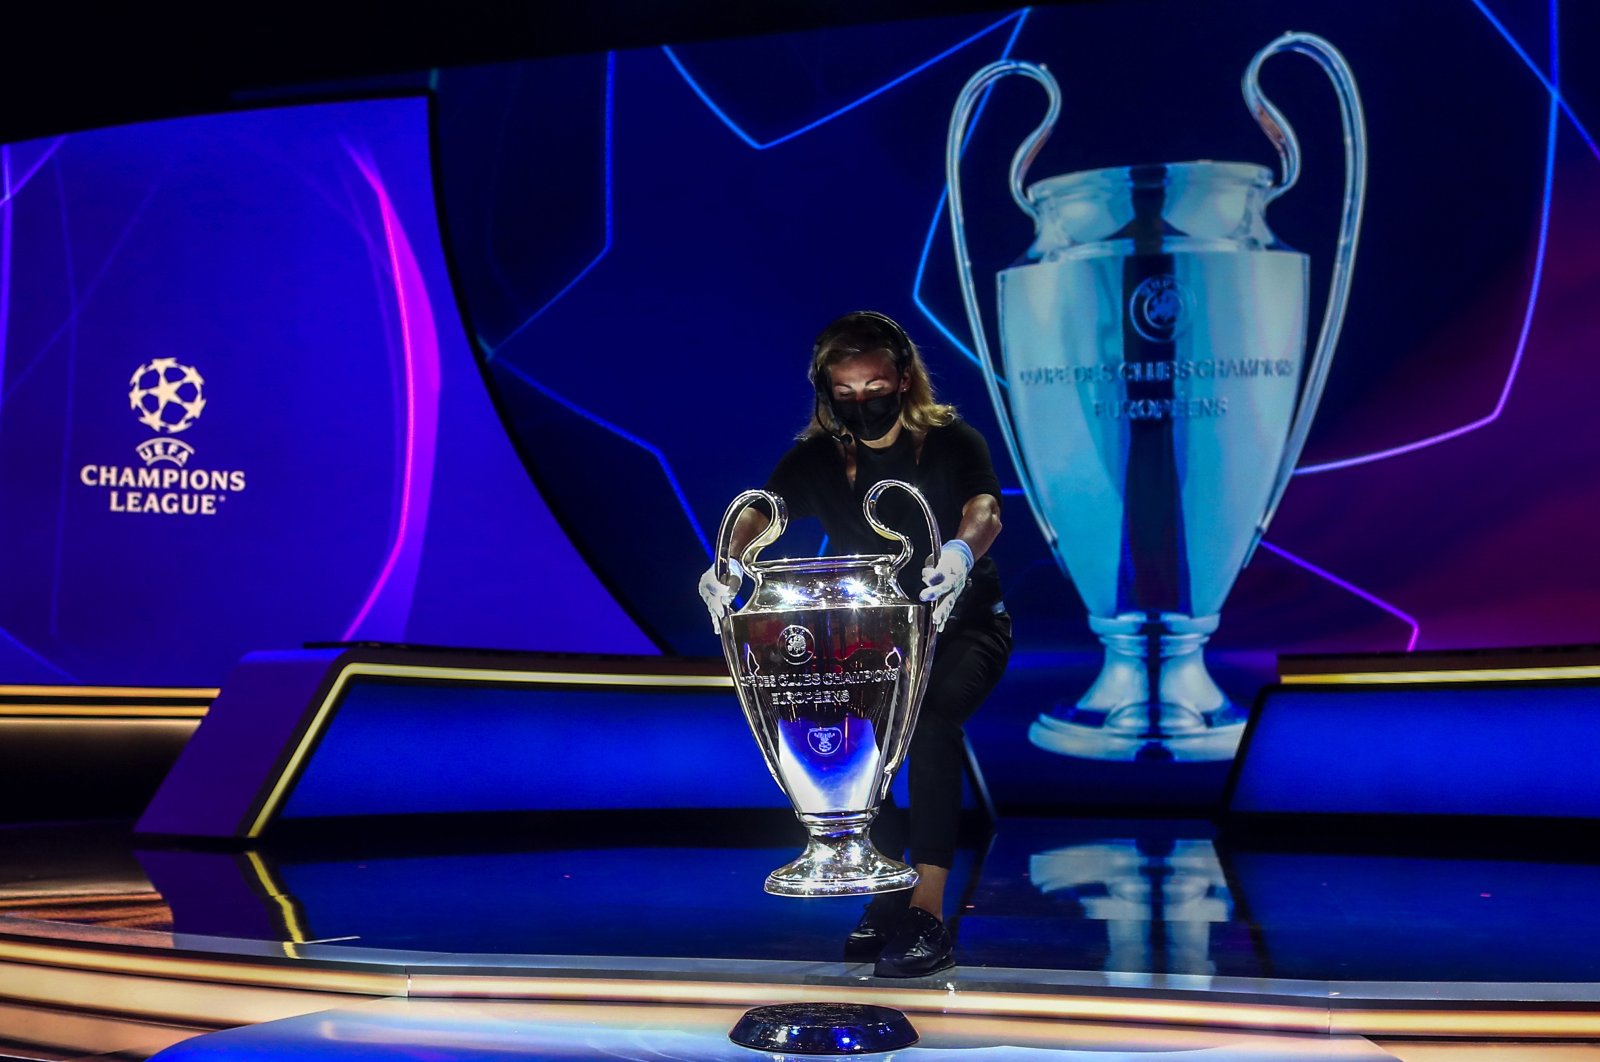 UEFA Champions League to expose gulf between elite clubs and minnows